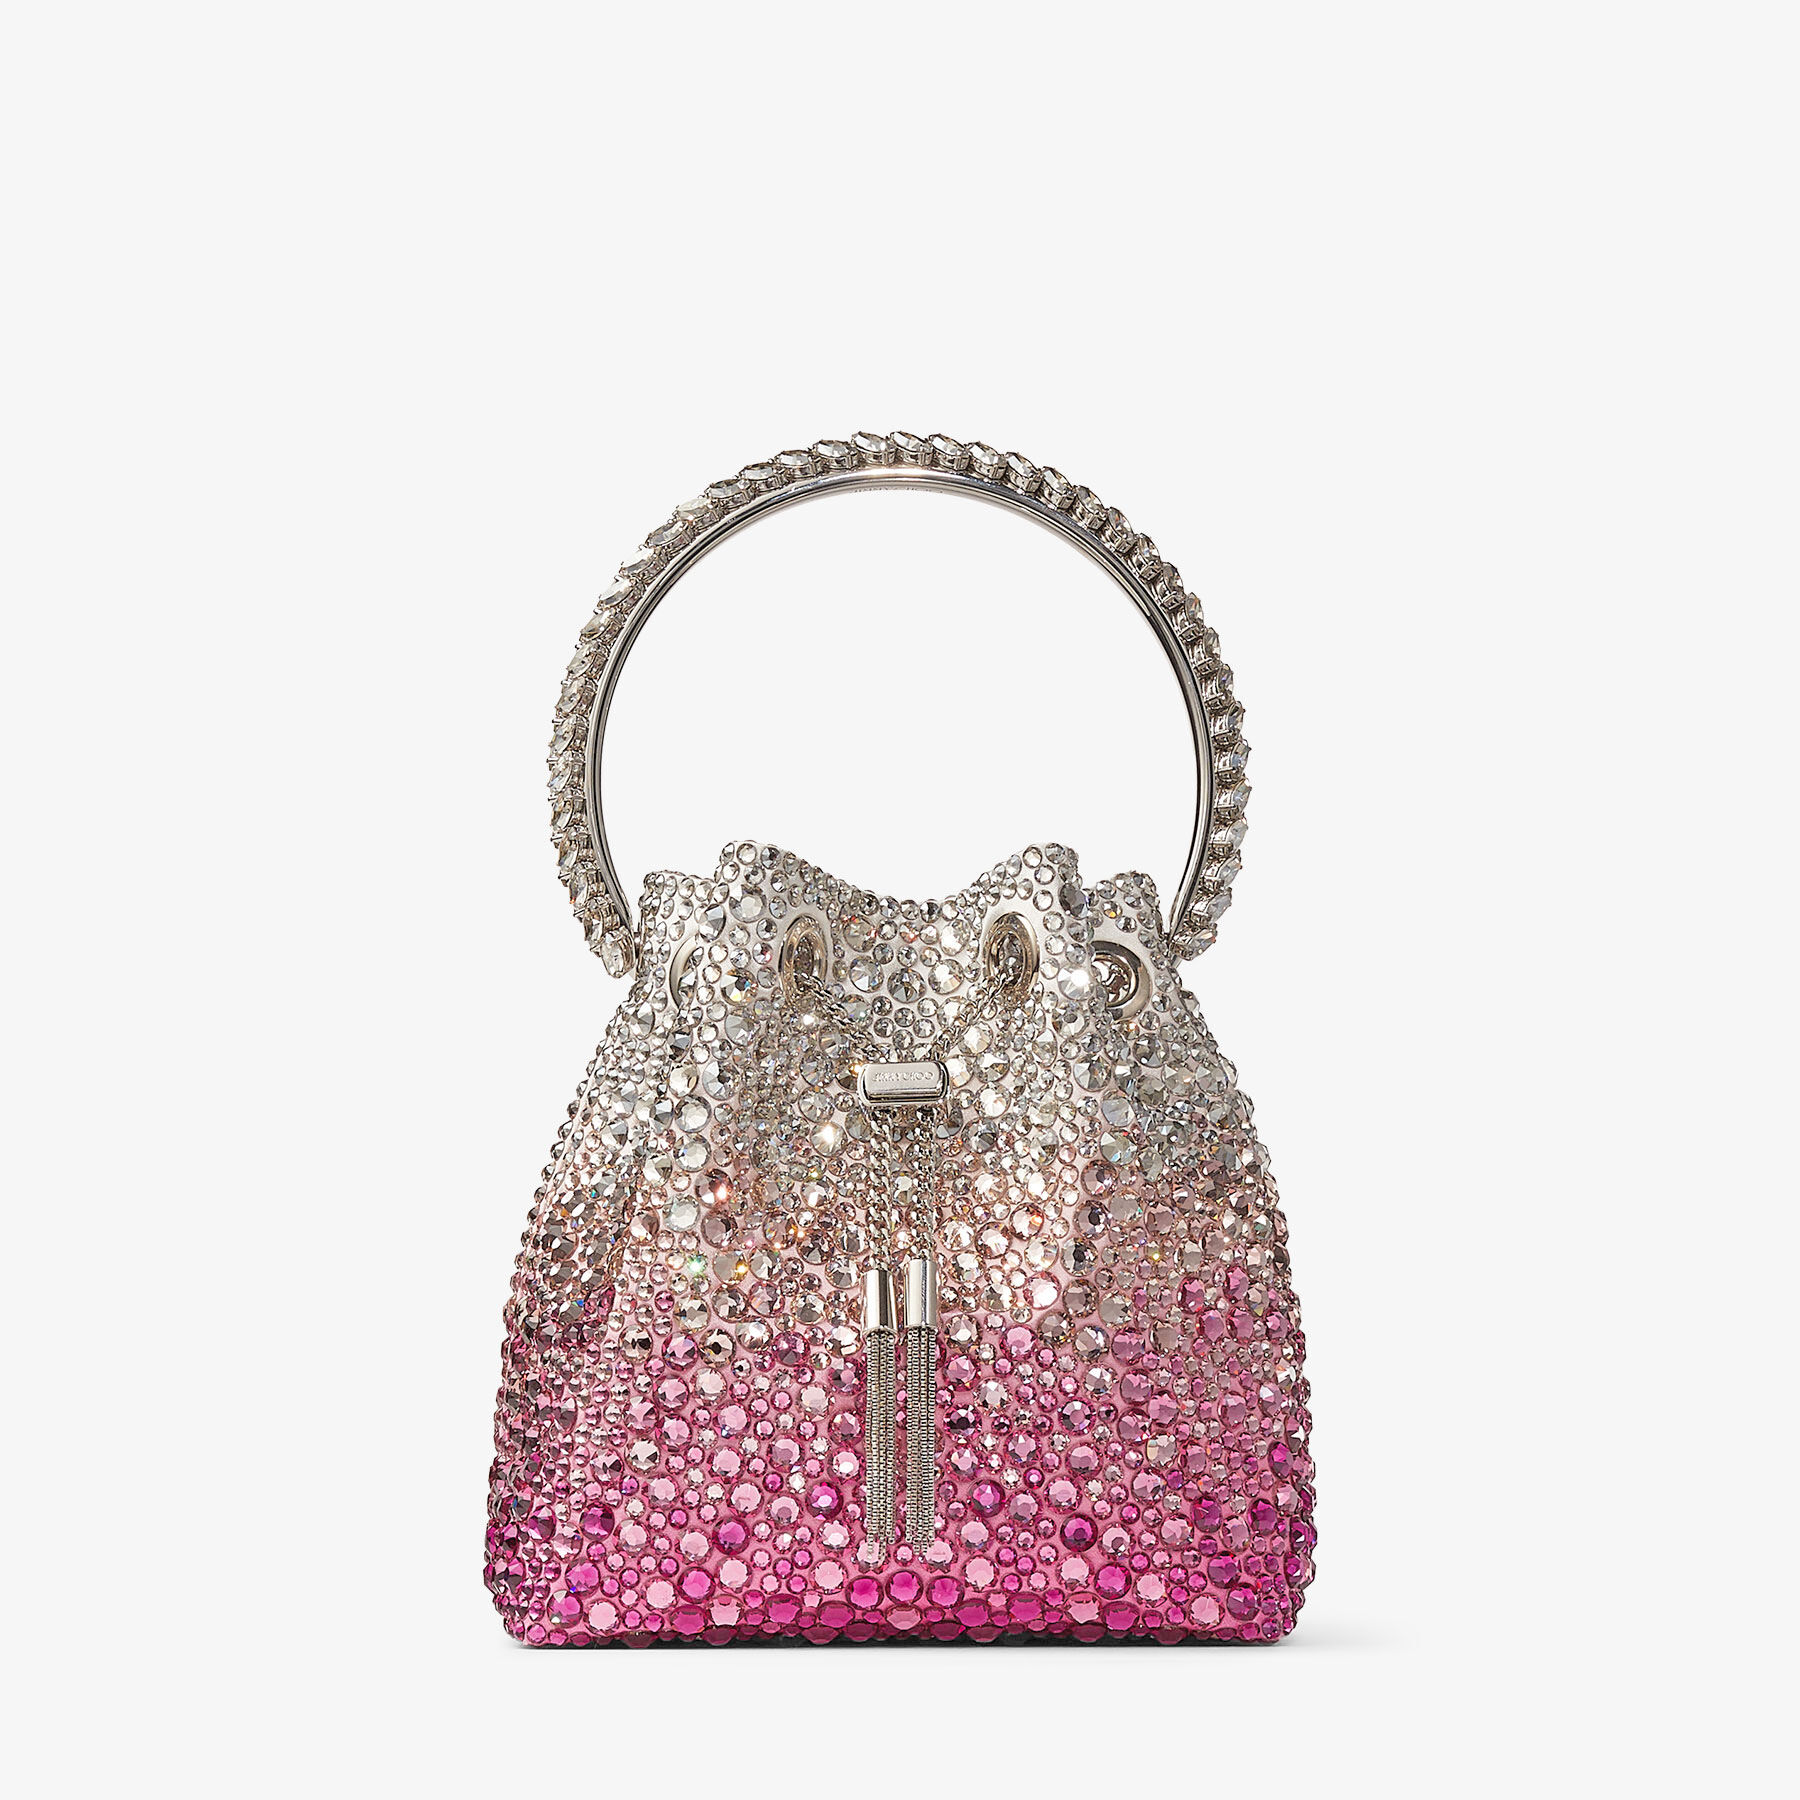 BON BON | Candy Pink and Silver Satin Bag withcrystals | JIMMY CHOO